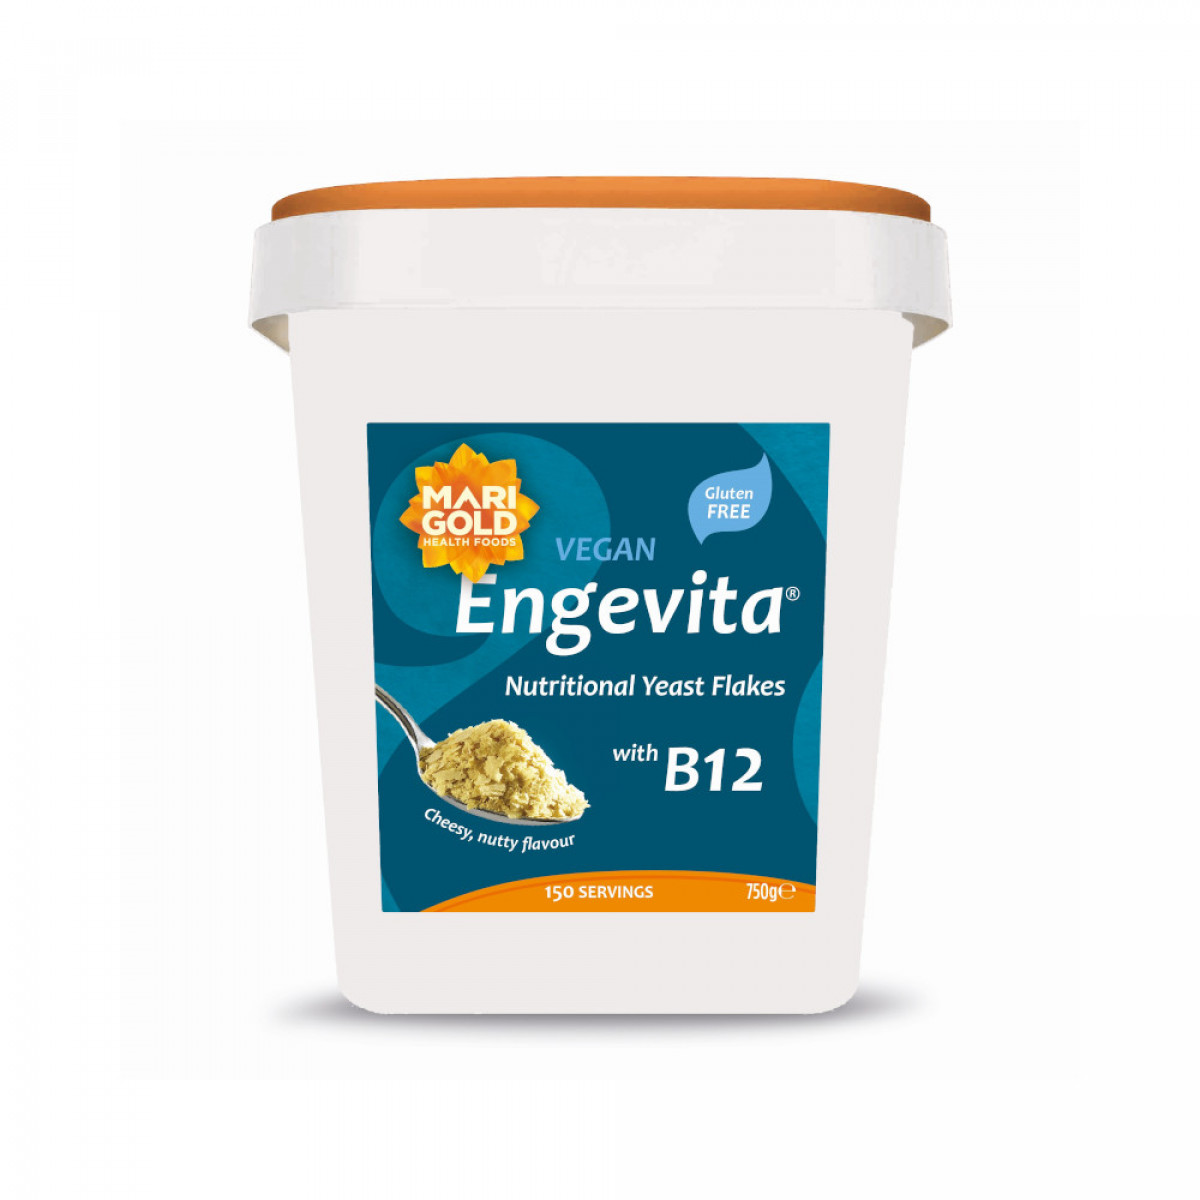 Product picture for Catering Size - Engevita Yeast Flakes + B12